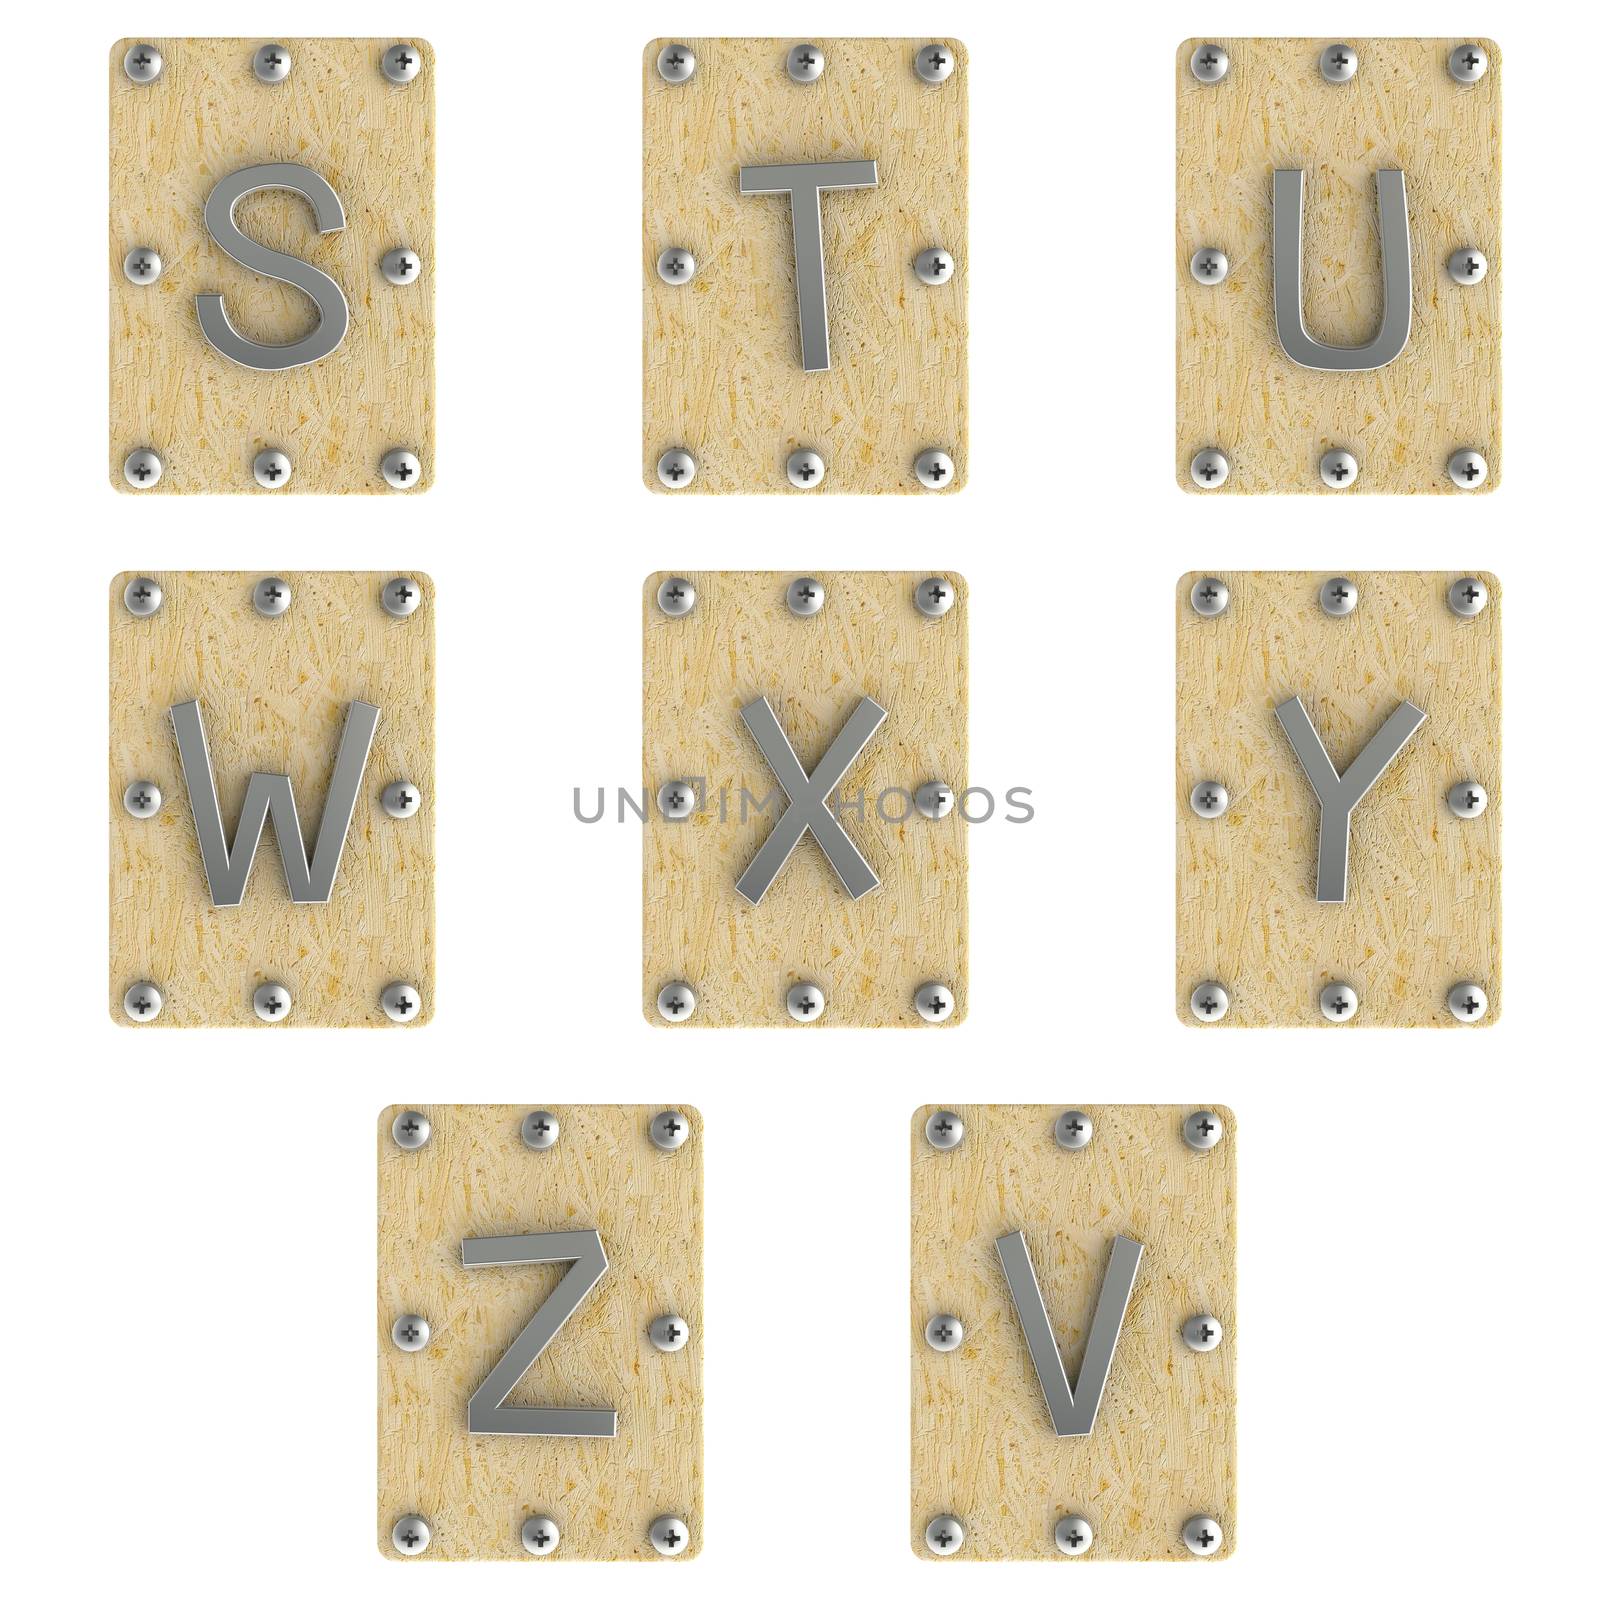 Font alphabe stainless on wood Oriented Strand Board (OSB)  plate